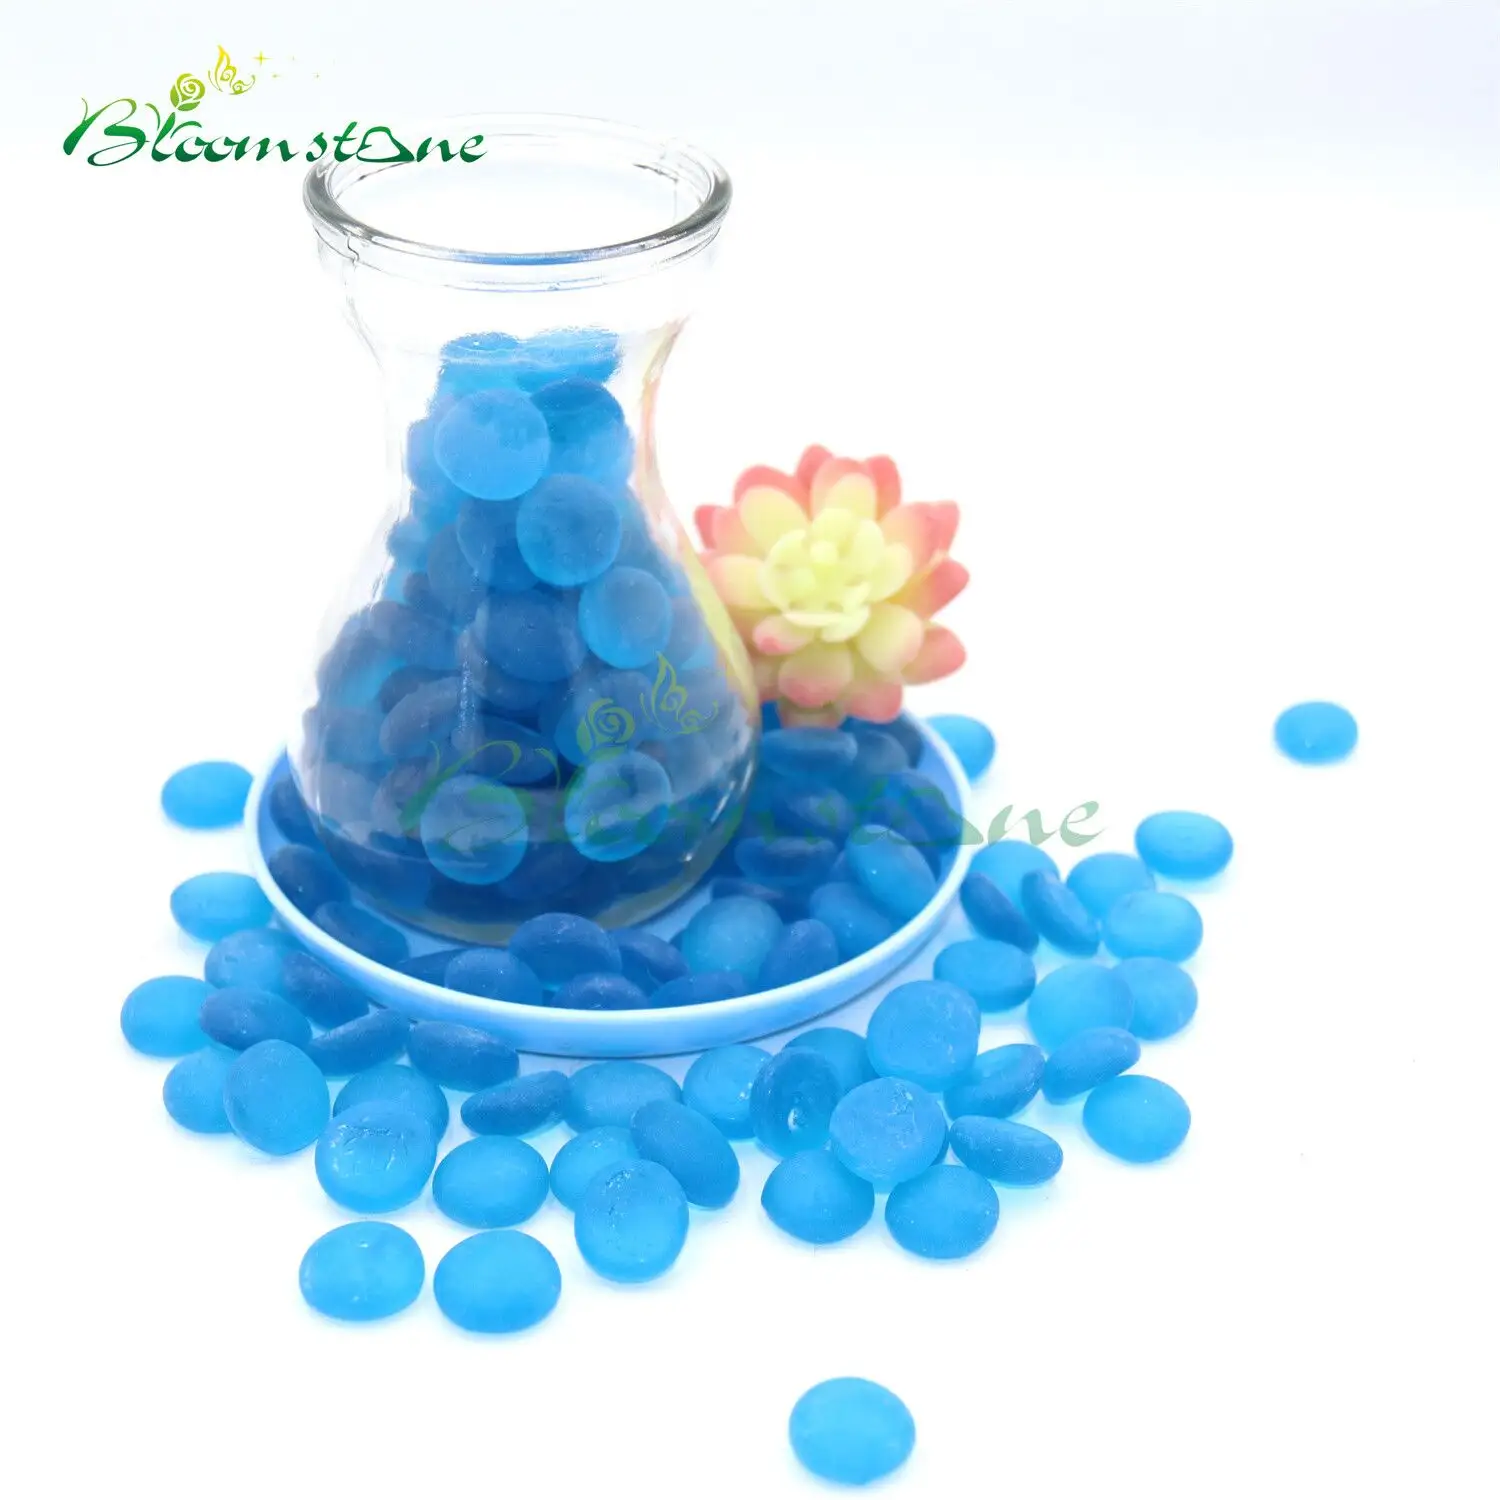 Ocean Style Frosted Sea Glass Gems Flat Marbles Aquarium Pebble Stones for Bowl Vase Fillers